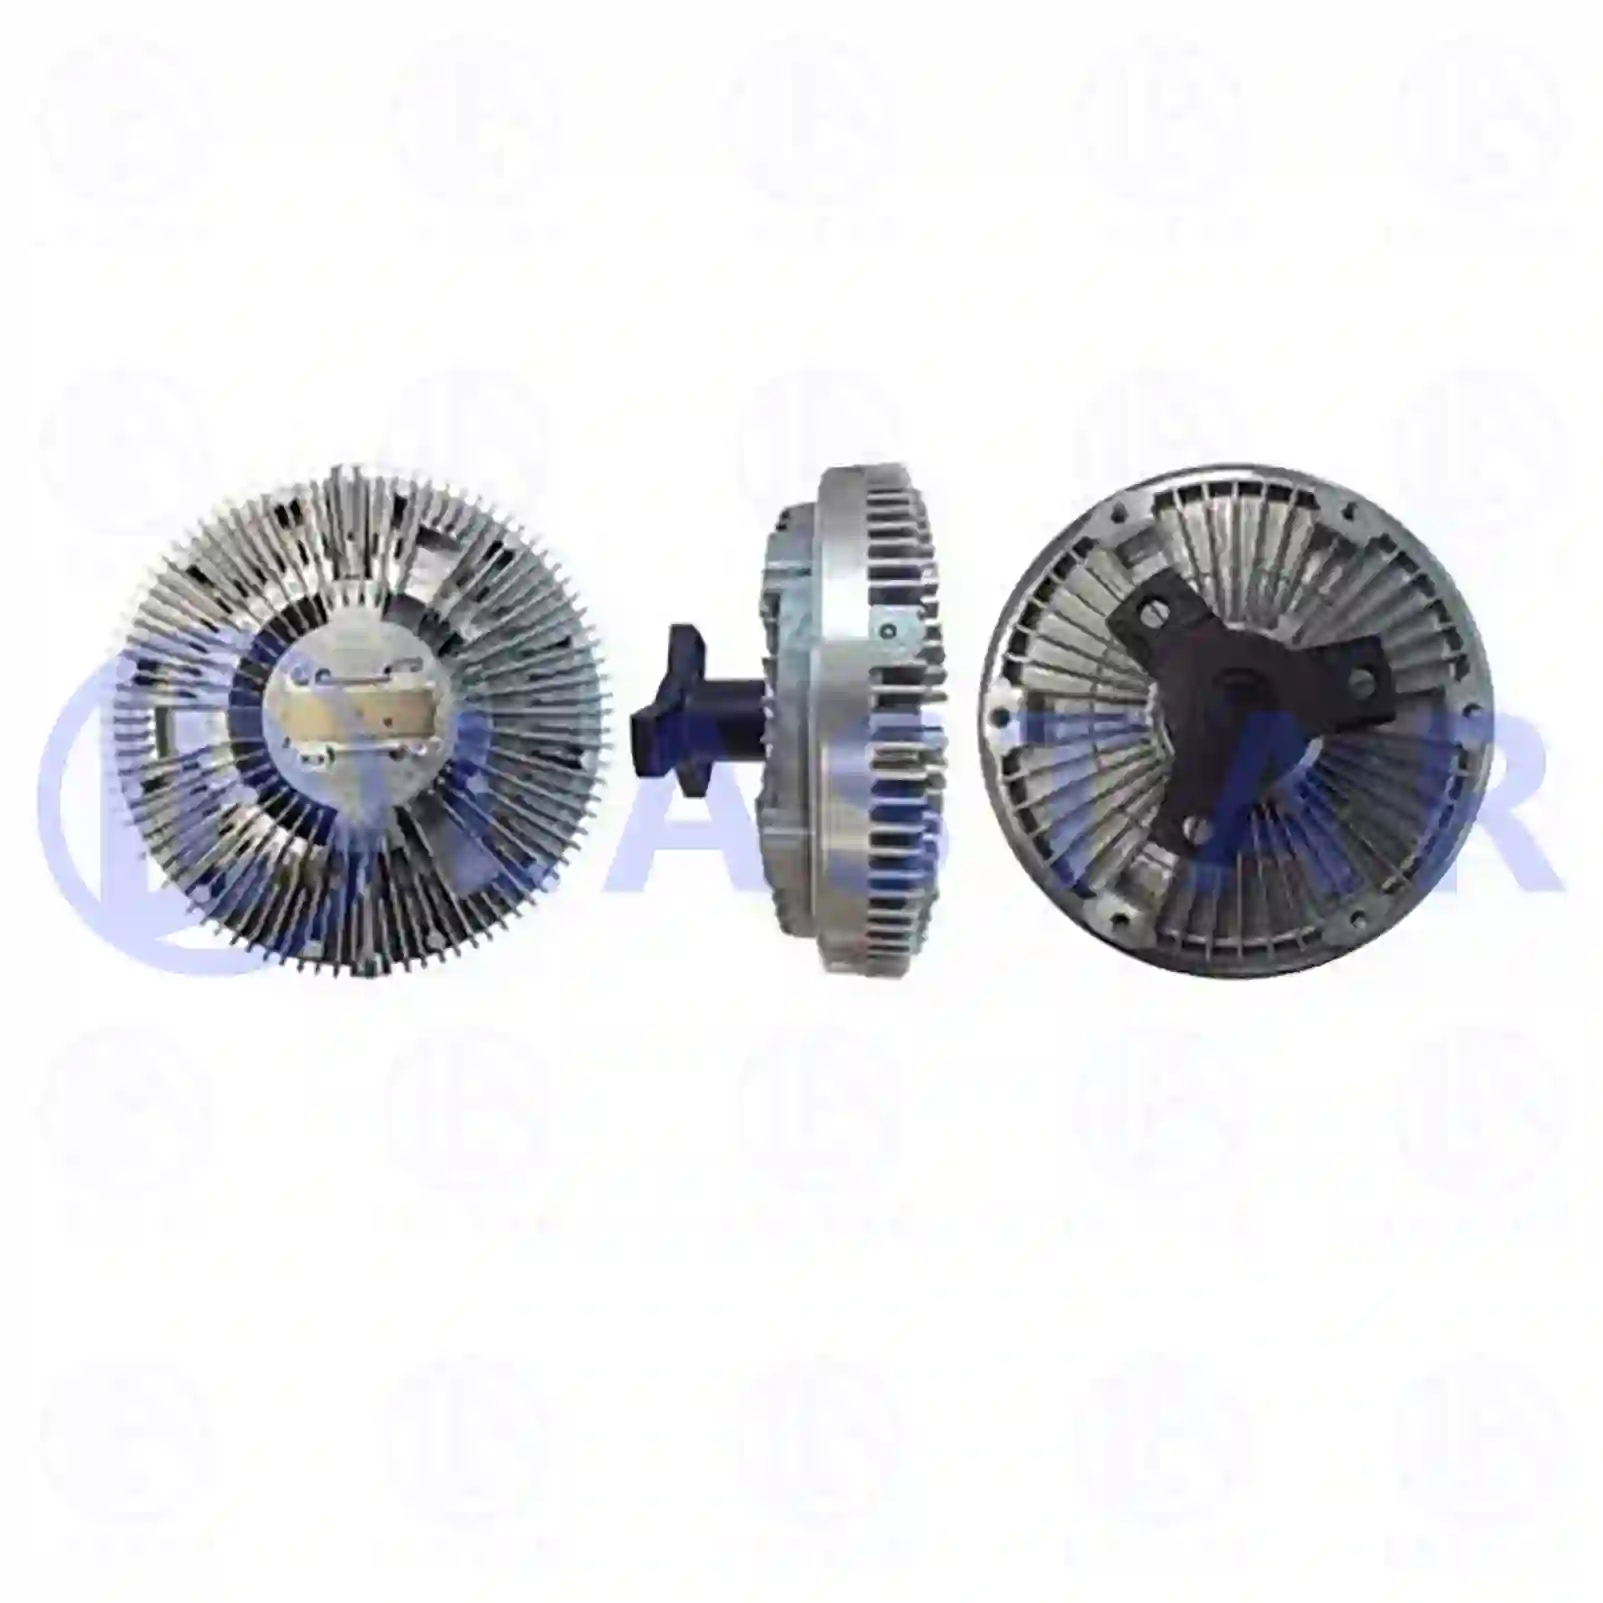 Fan clutch, 77709266, 504038113 ||  77709266 Lastar Spare Part | Truck Spare Parts, Auotomotive Spare Parts Fan clutch, 77709266, 504038113 ||  77709266 Lastar Spare Part | Truck Spare Parts, Auotomotive Spare Parts